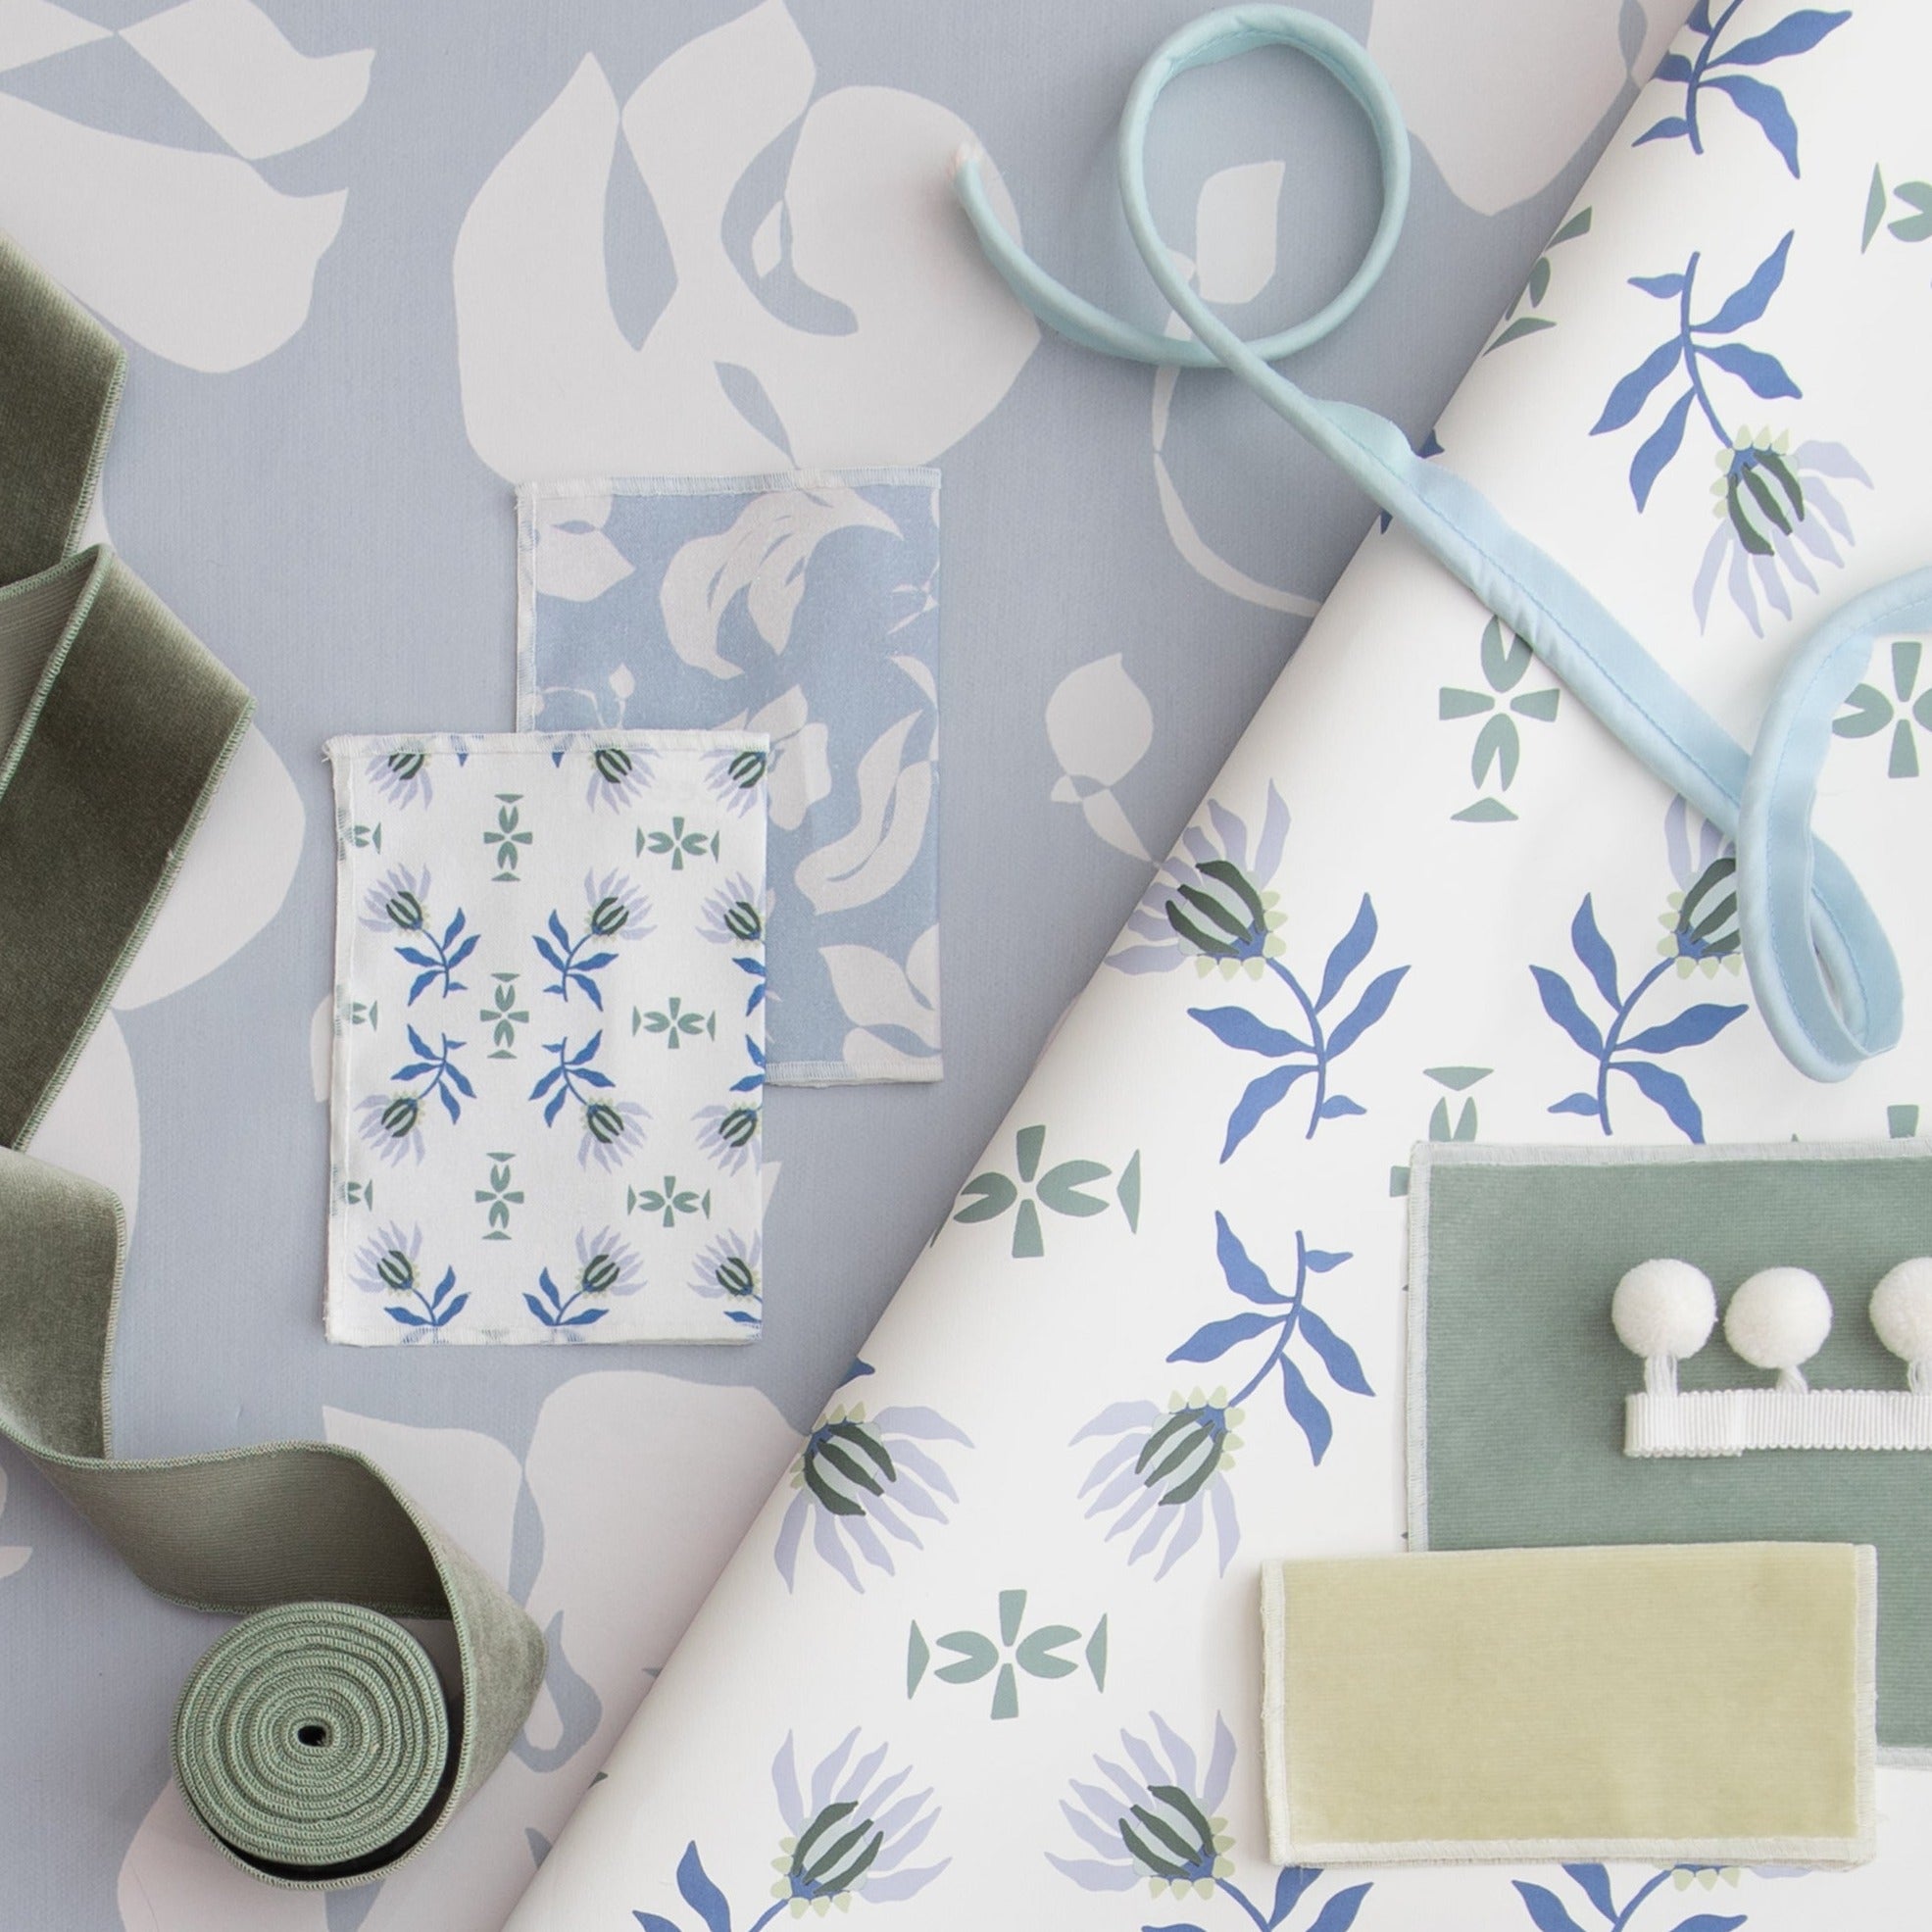 Interior design moodboard and fabric inspirations with Blue & Green Floral Printed Swatch, Fern Green Velvet Band and Blue Green Velvet Swatch